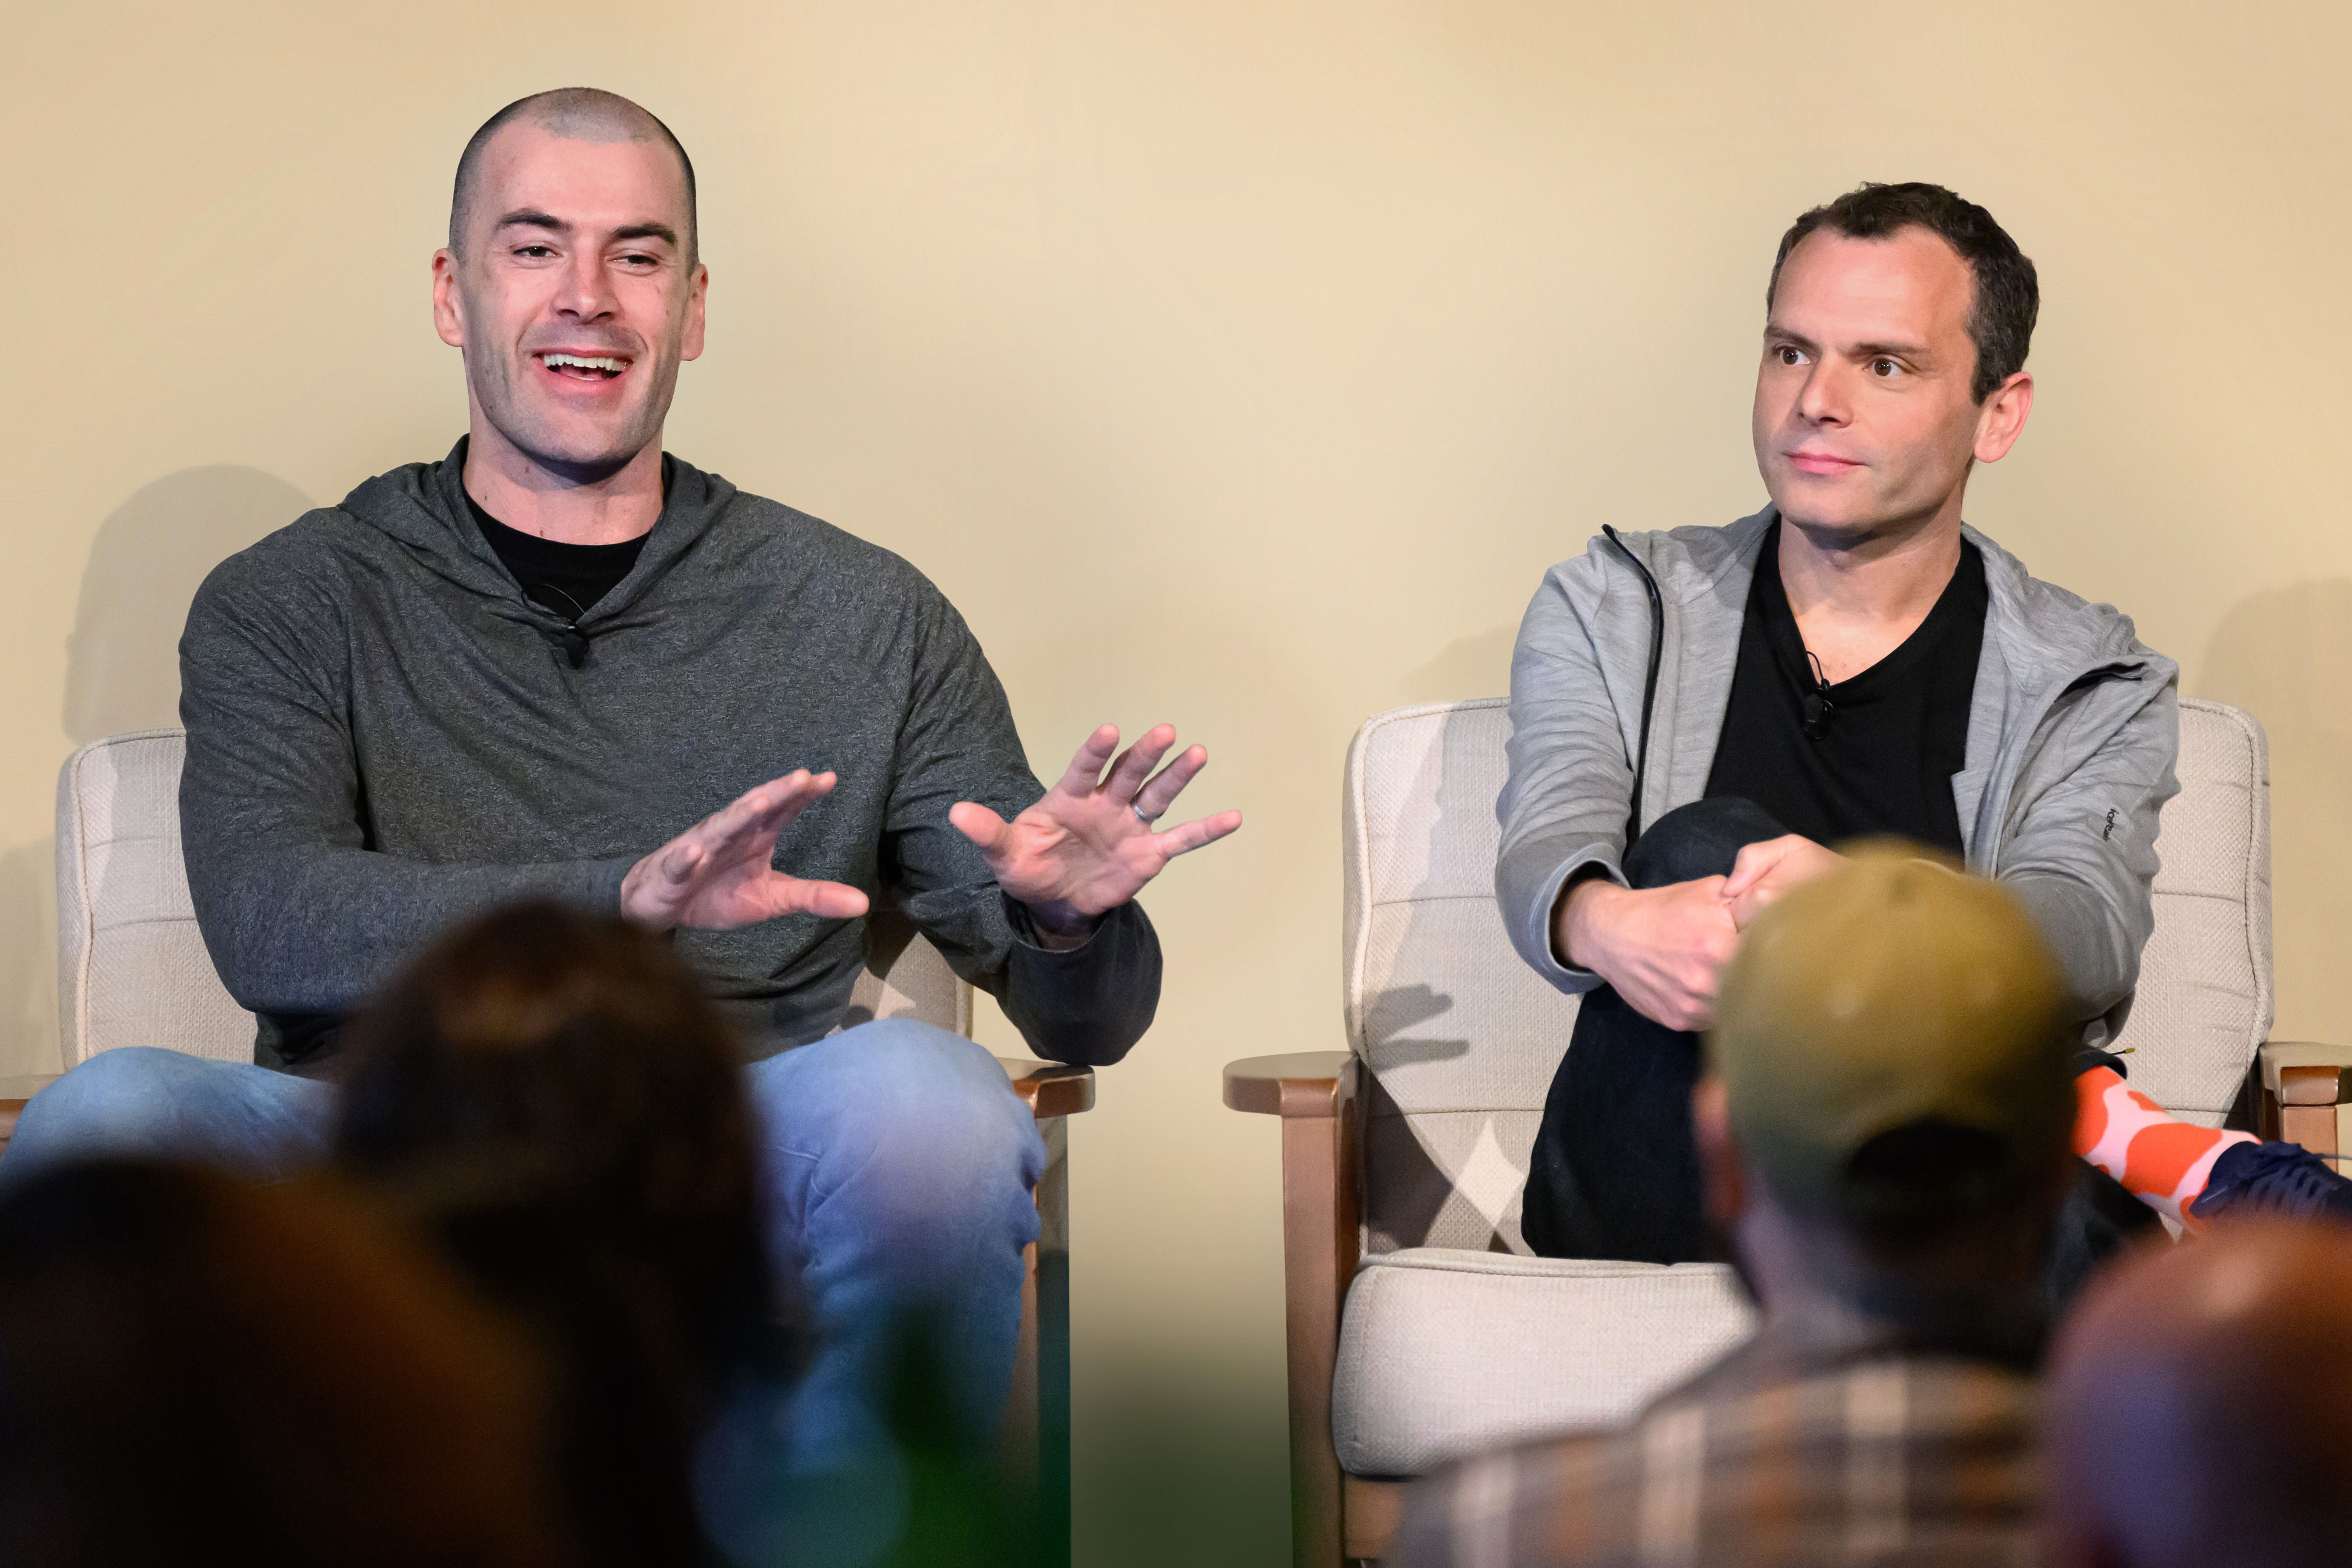 Jay Kreps of Confluent (left) with Olivier Pomel of Datadog (right) speaking at Index's Annual Retreat.